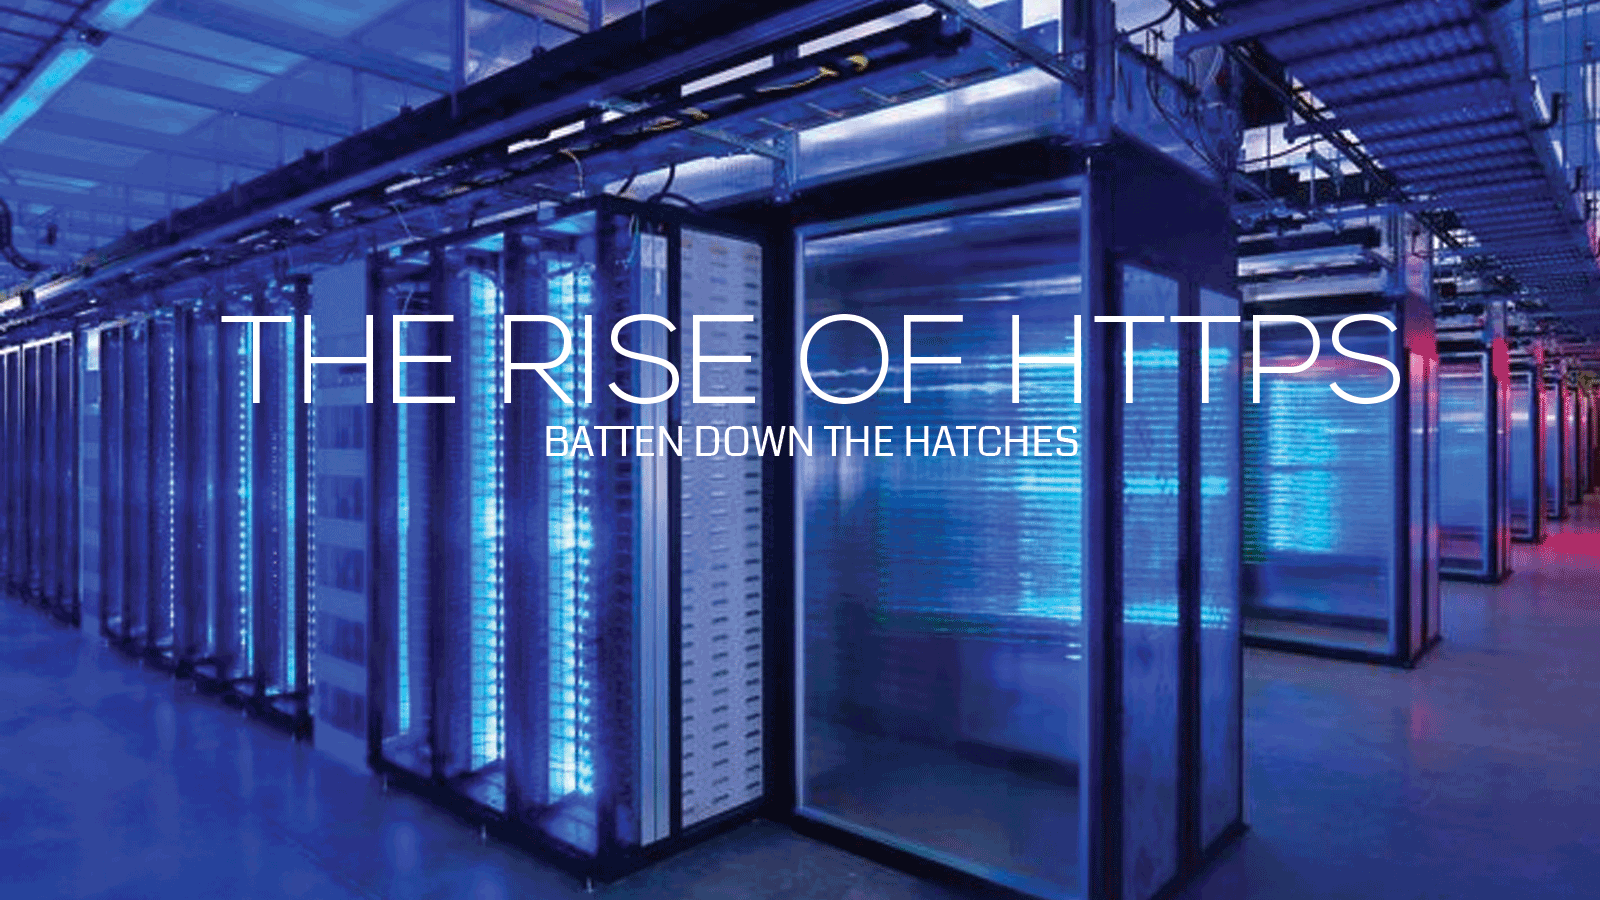 Batten Down The Hatches: The Rise of HTTPS